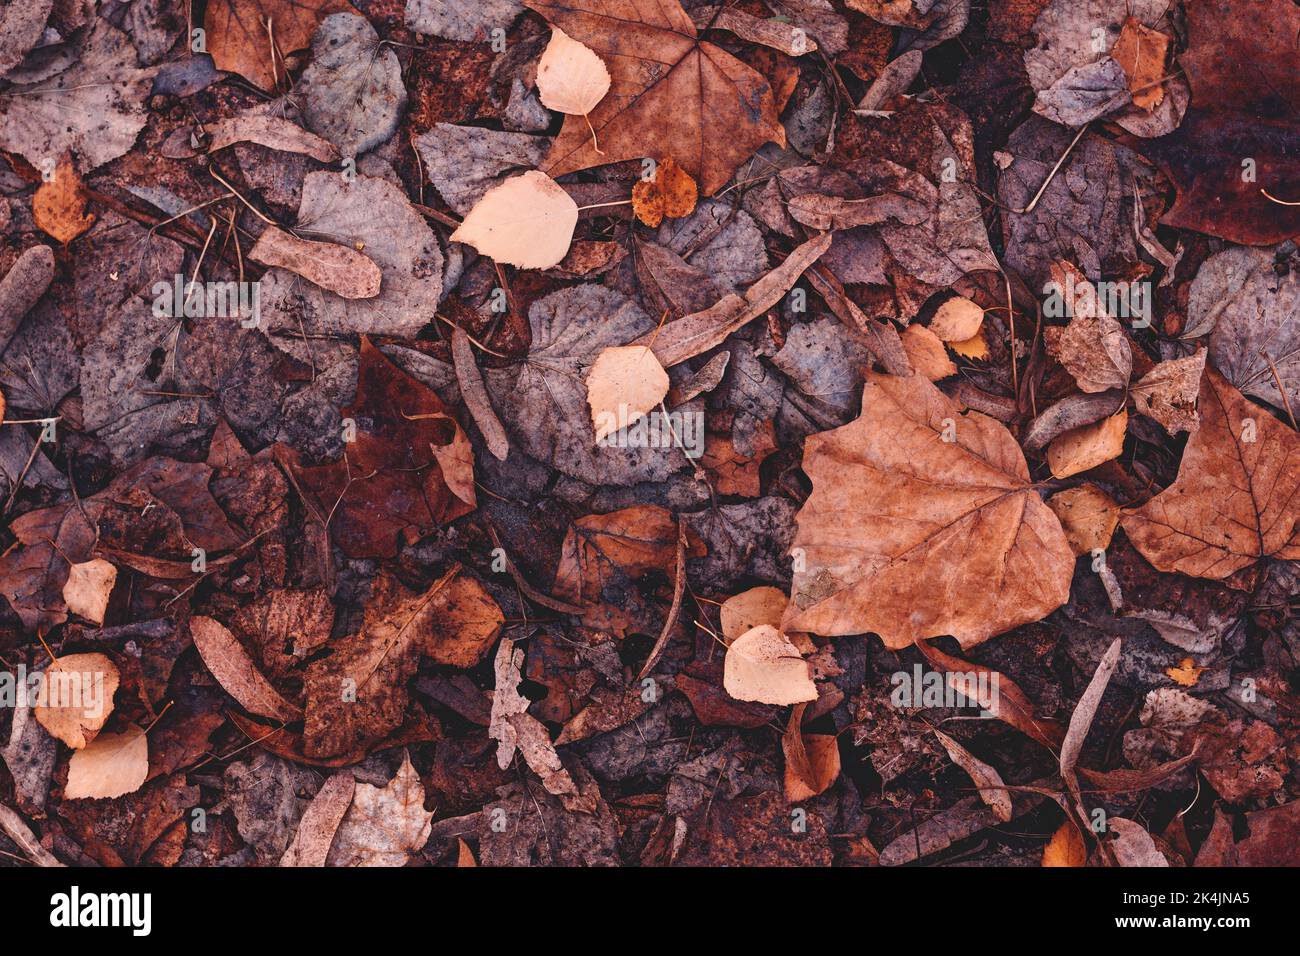 Dry brown leaves fallen on the ground as autumn season background, top view image Stock Photo